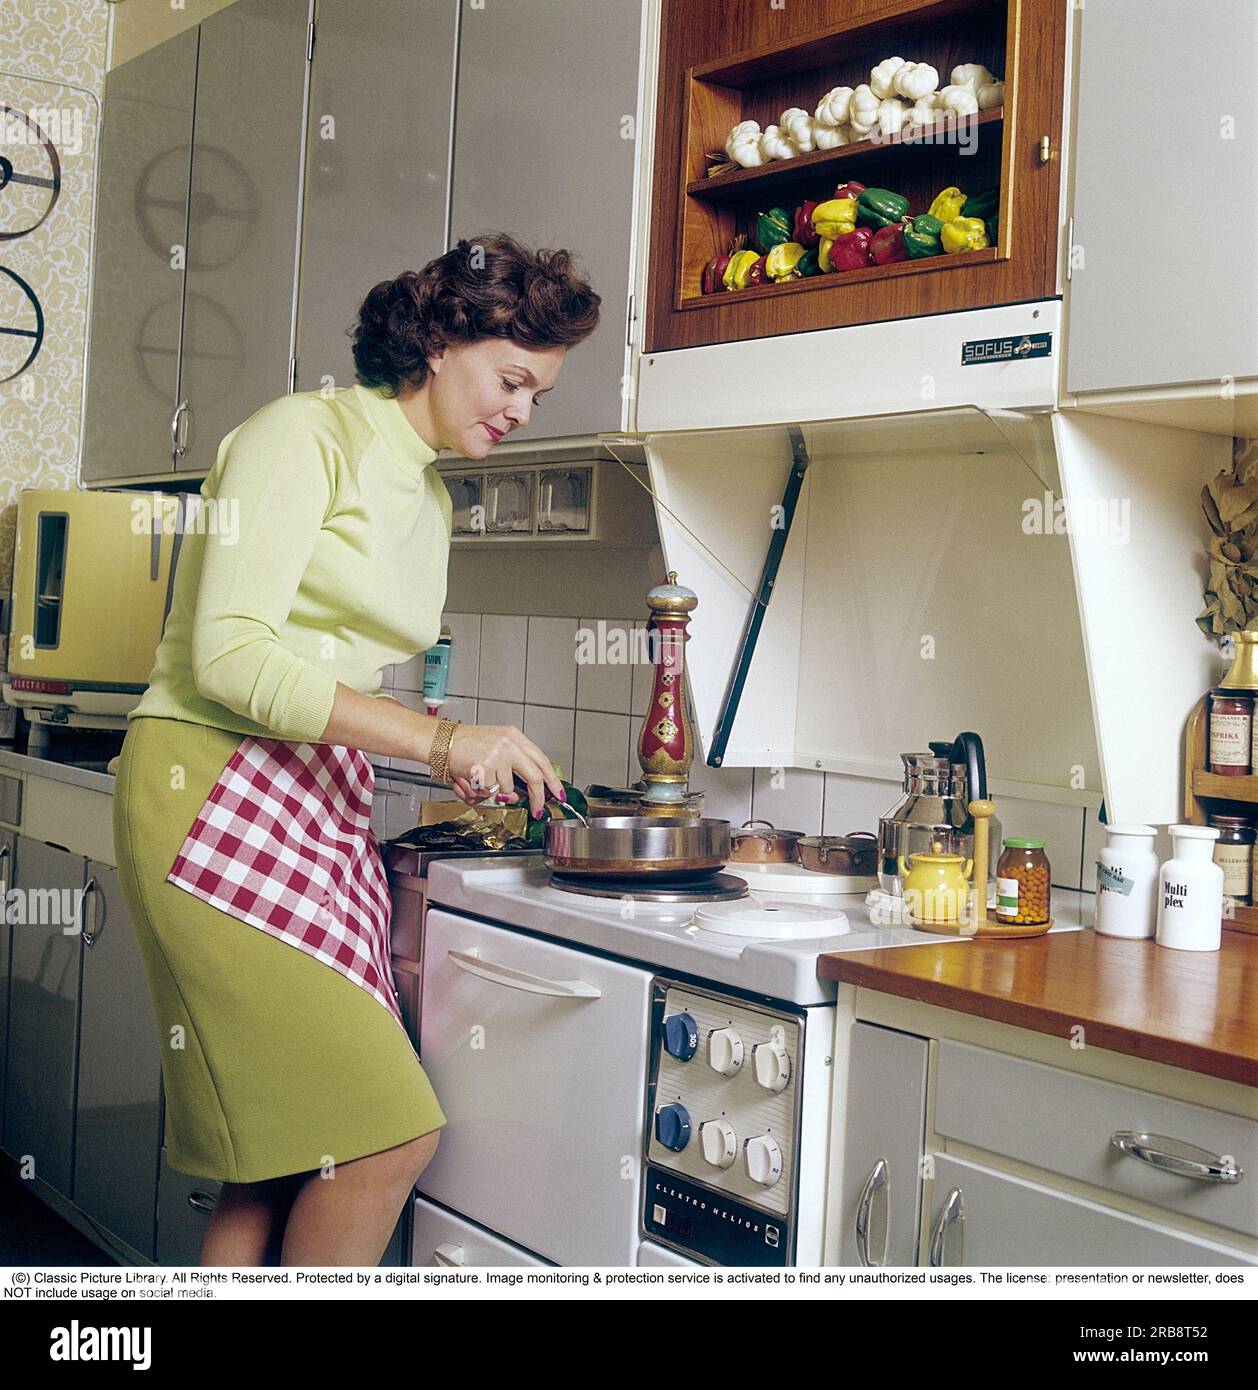 Haide Göransson (1928-2008)  Swedish actor and fashion model.  Here at home, in the kitchen where she stands by the stove and cooks, in the corner is a round countertop dishwasher from the brand electrolux, also called the round can, something that is easy to understand as the dishwasher has the odd round shape. Sweden 1968. Kristoffersson Stock Photo